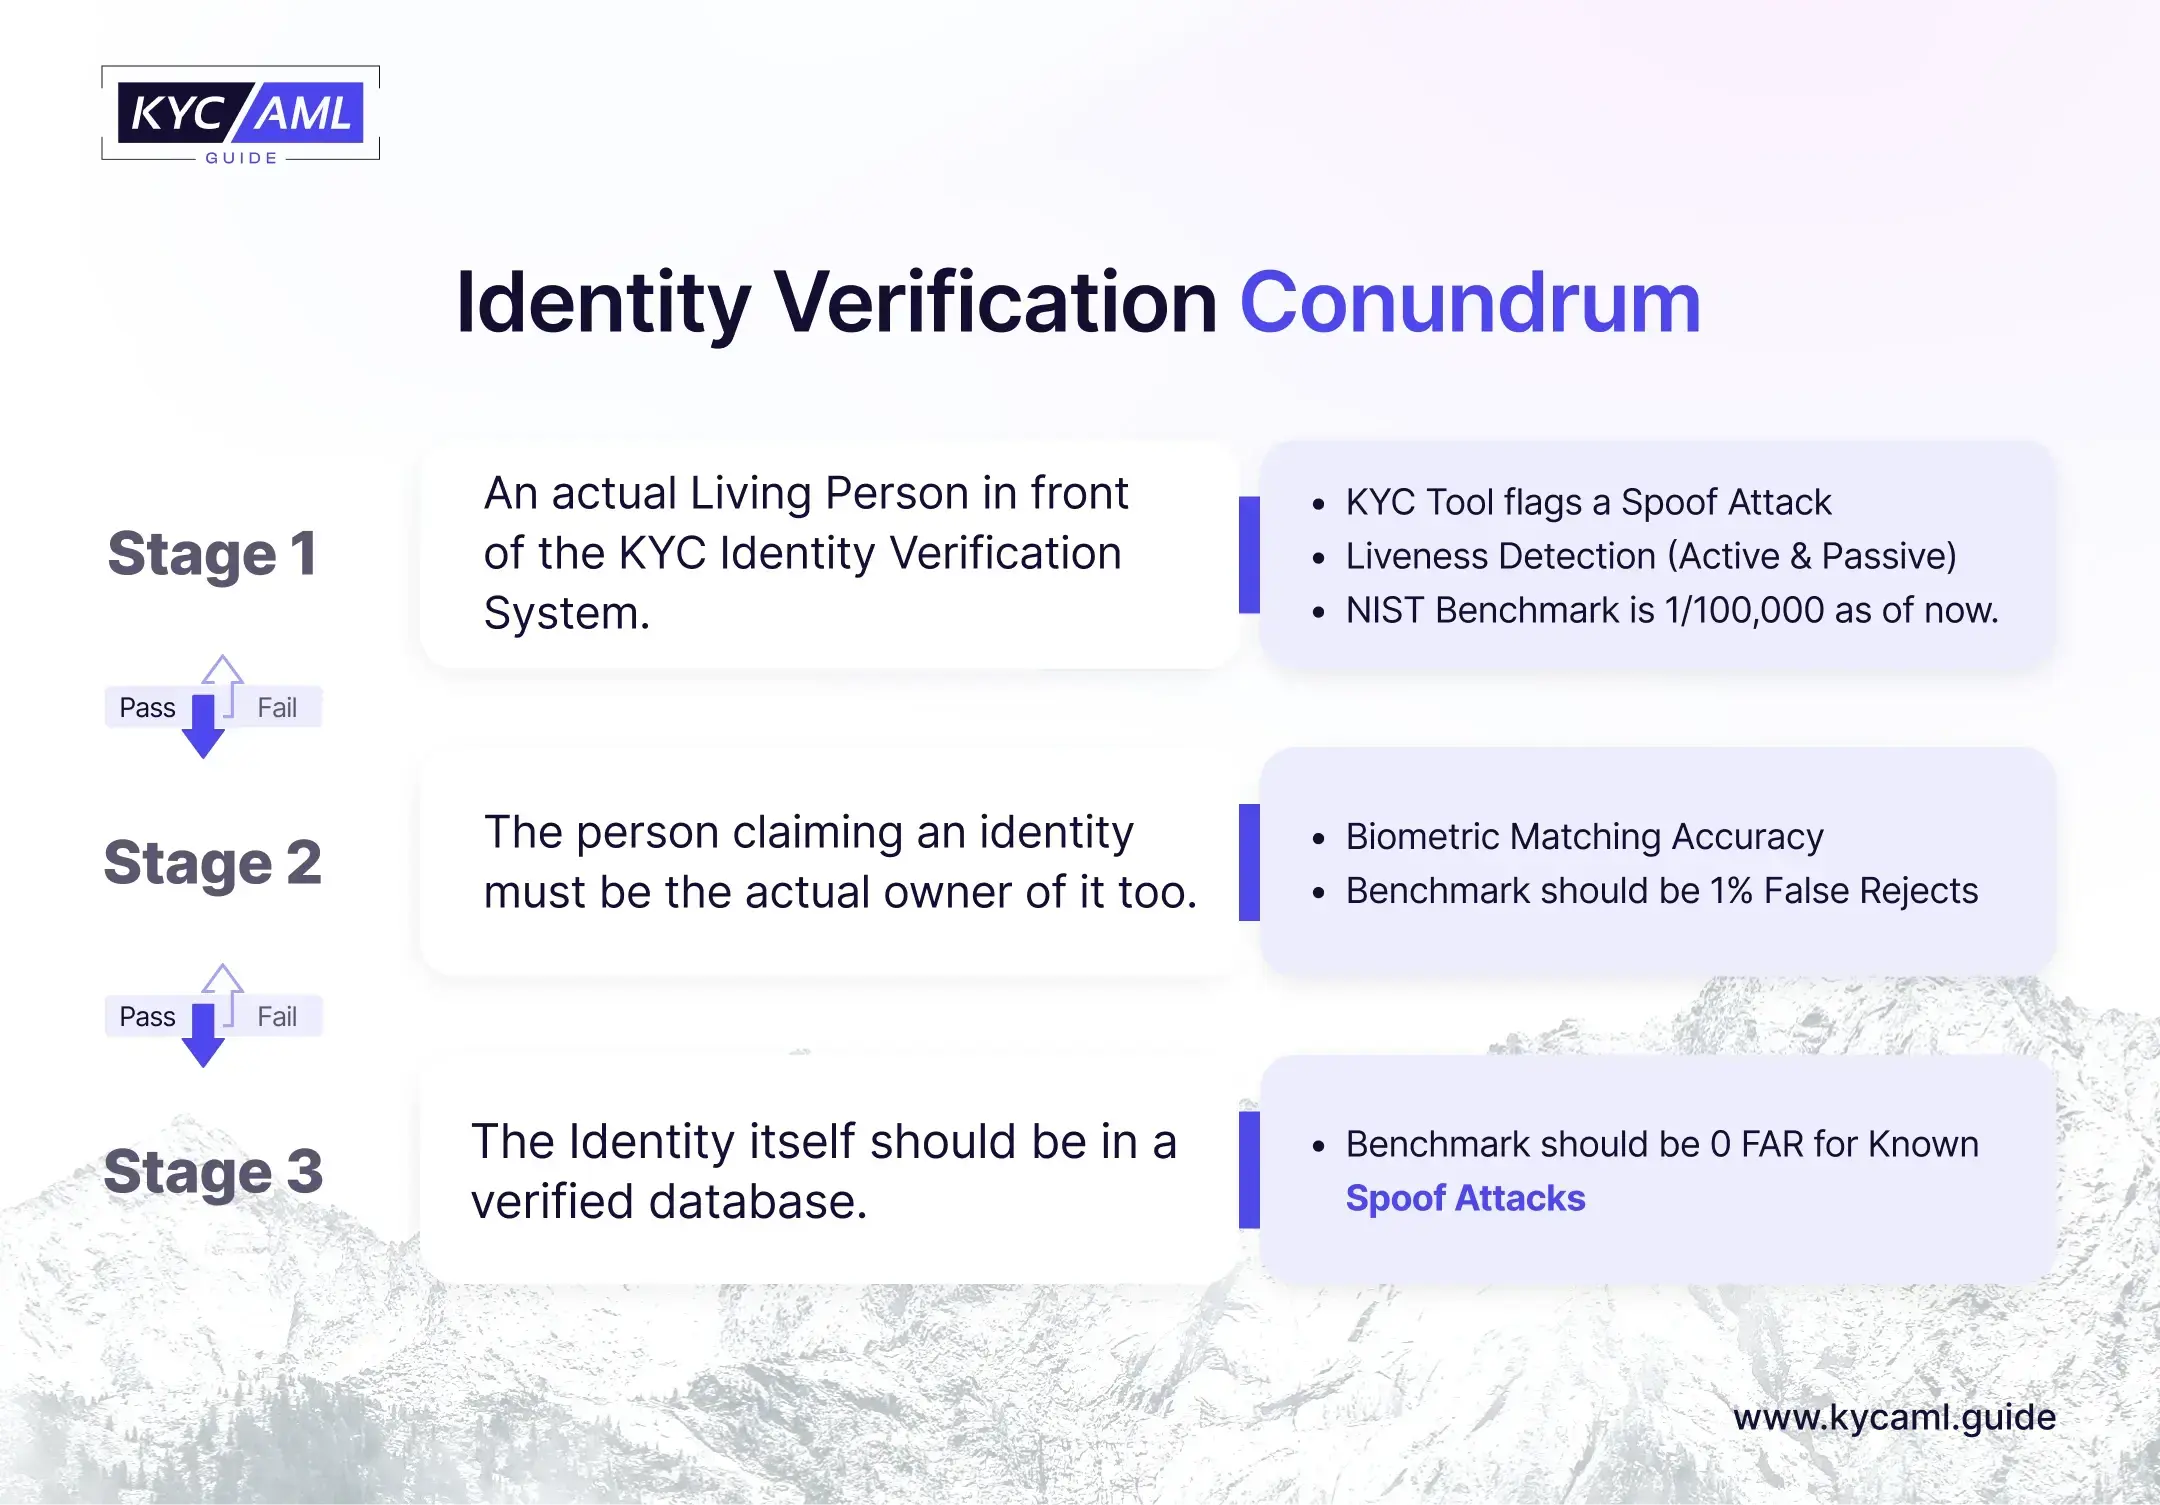 This image shows the benchmark standards in Identity Verification that are divided in 3 stages. Each stage requires to be passed to enter the next one. It covers the Liveness Detection, Ideal Threshold for FAR and FRR and Biometric Matching Accuracy